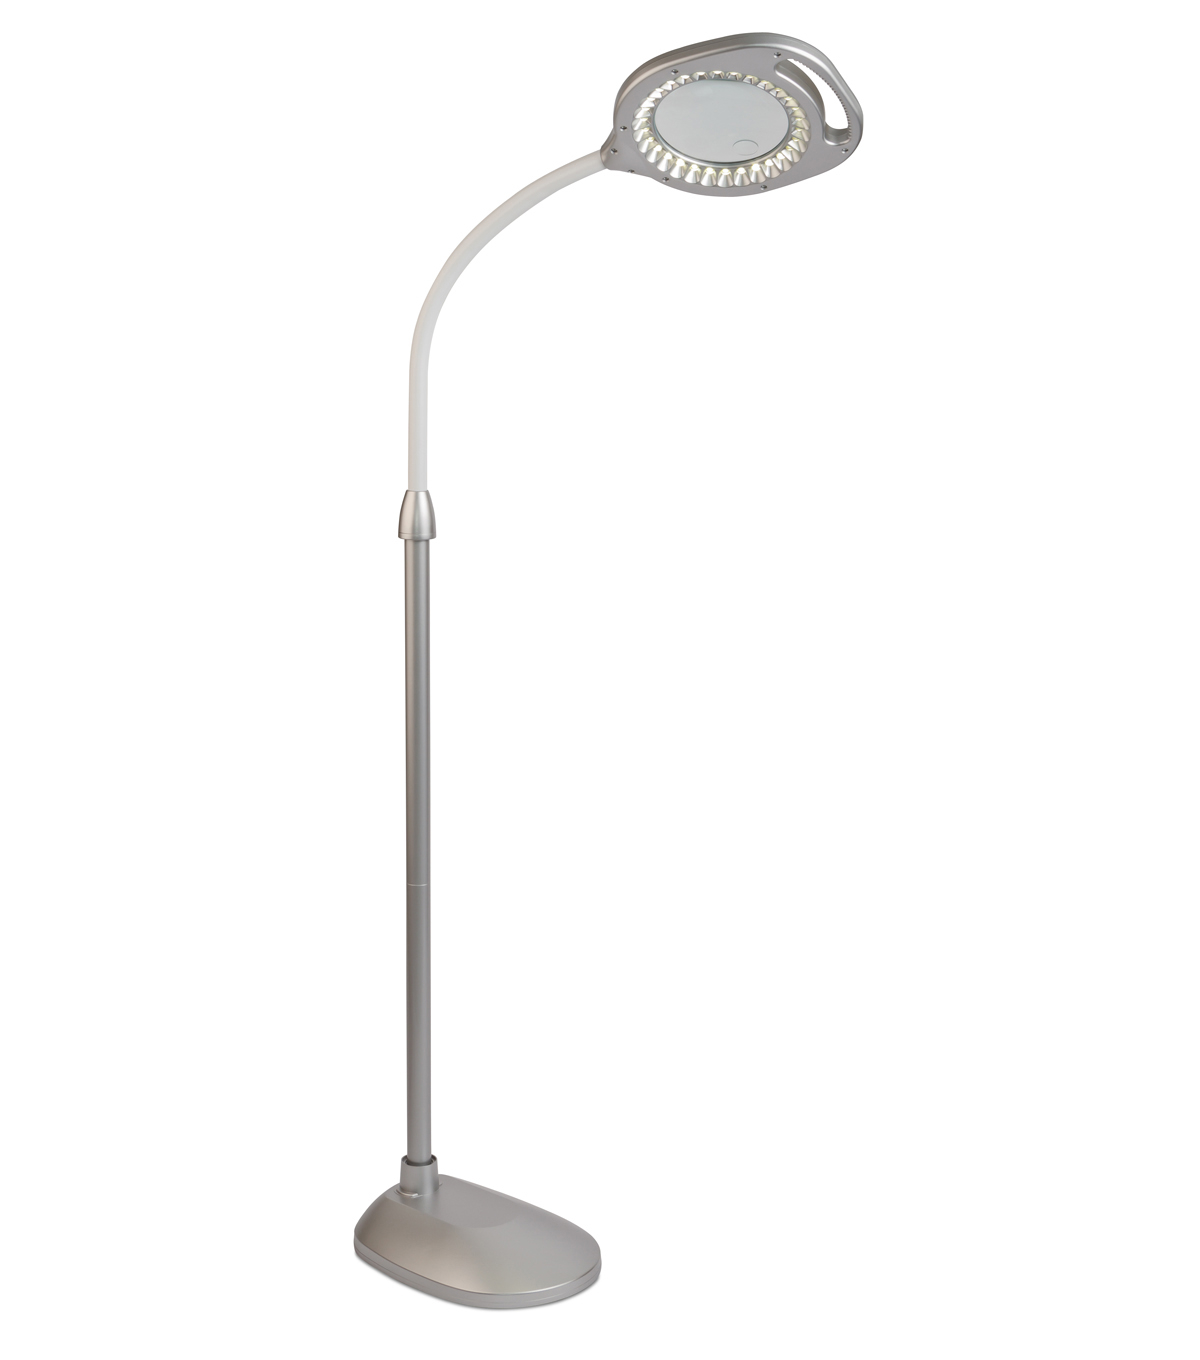 Ottlite 2 In 1 Led Magnifier Floor Table Lamp Silver within sizing 1200 X 1360